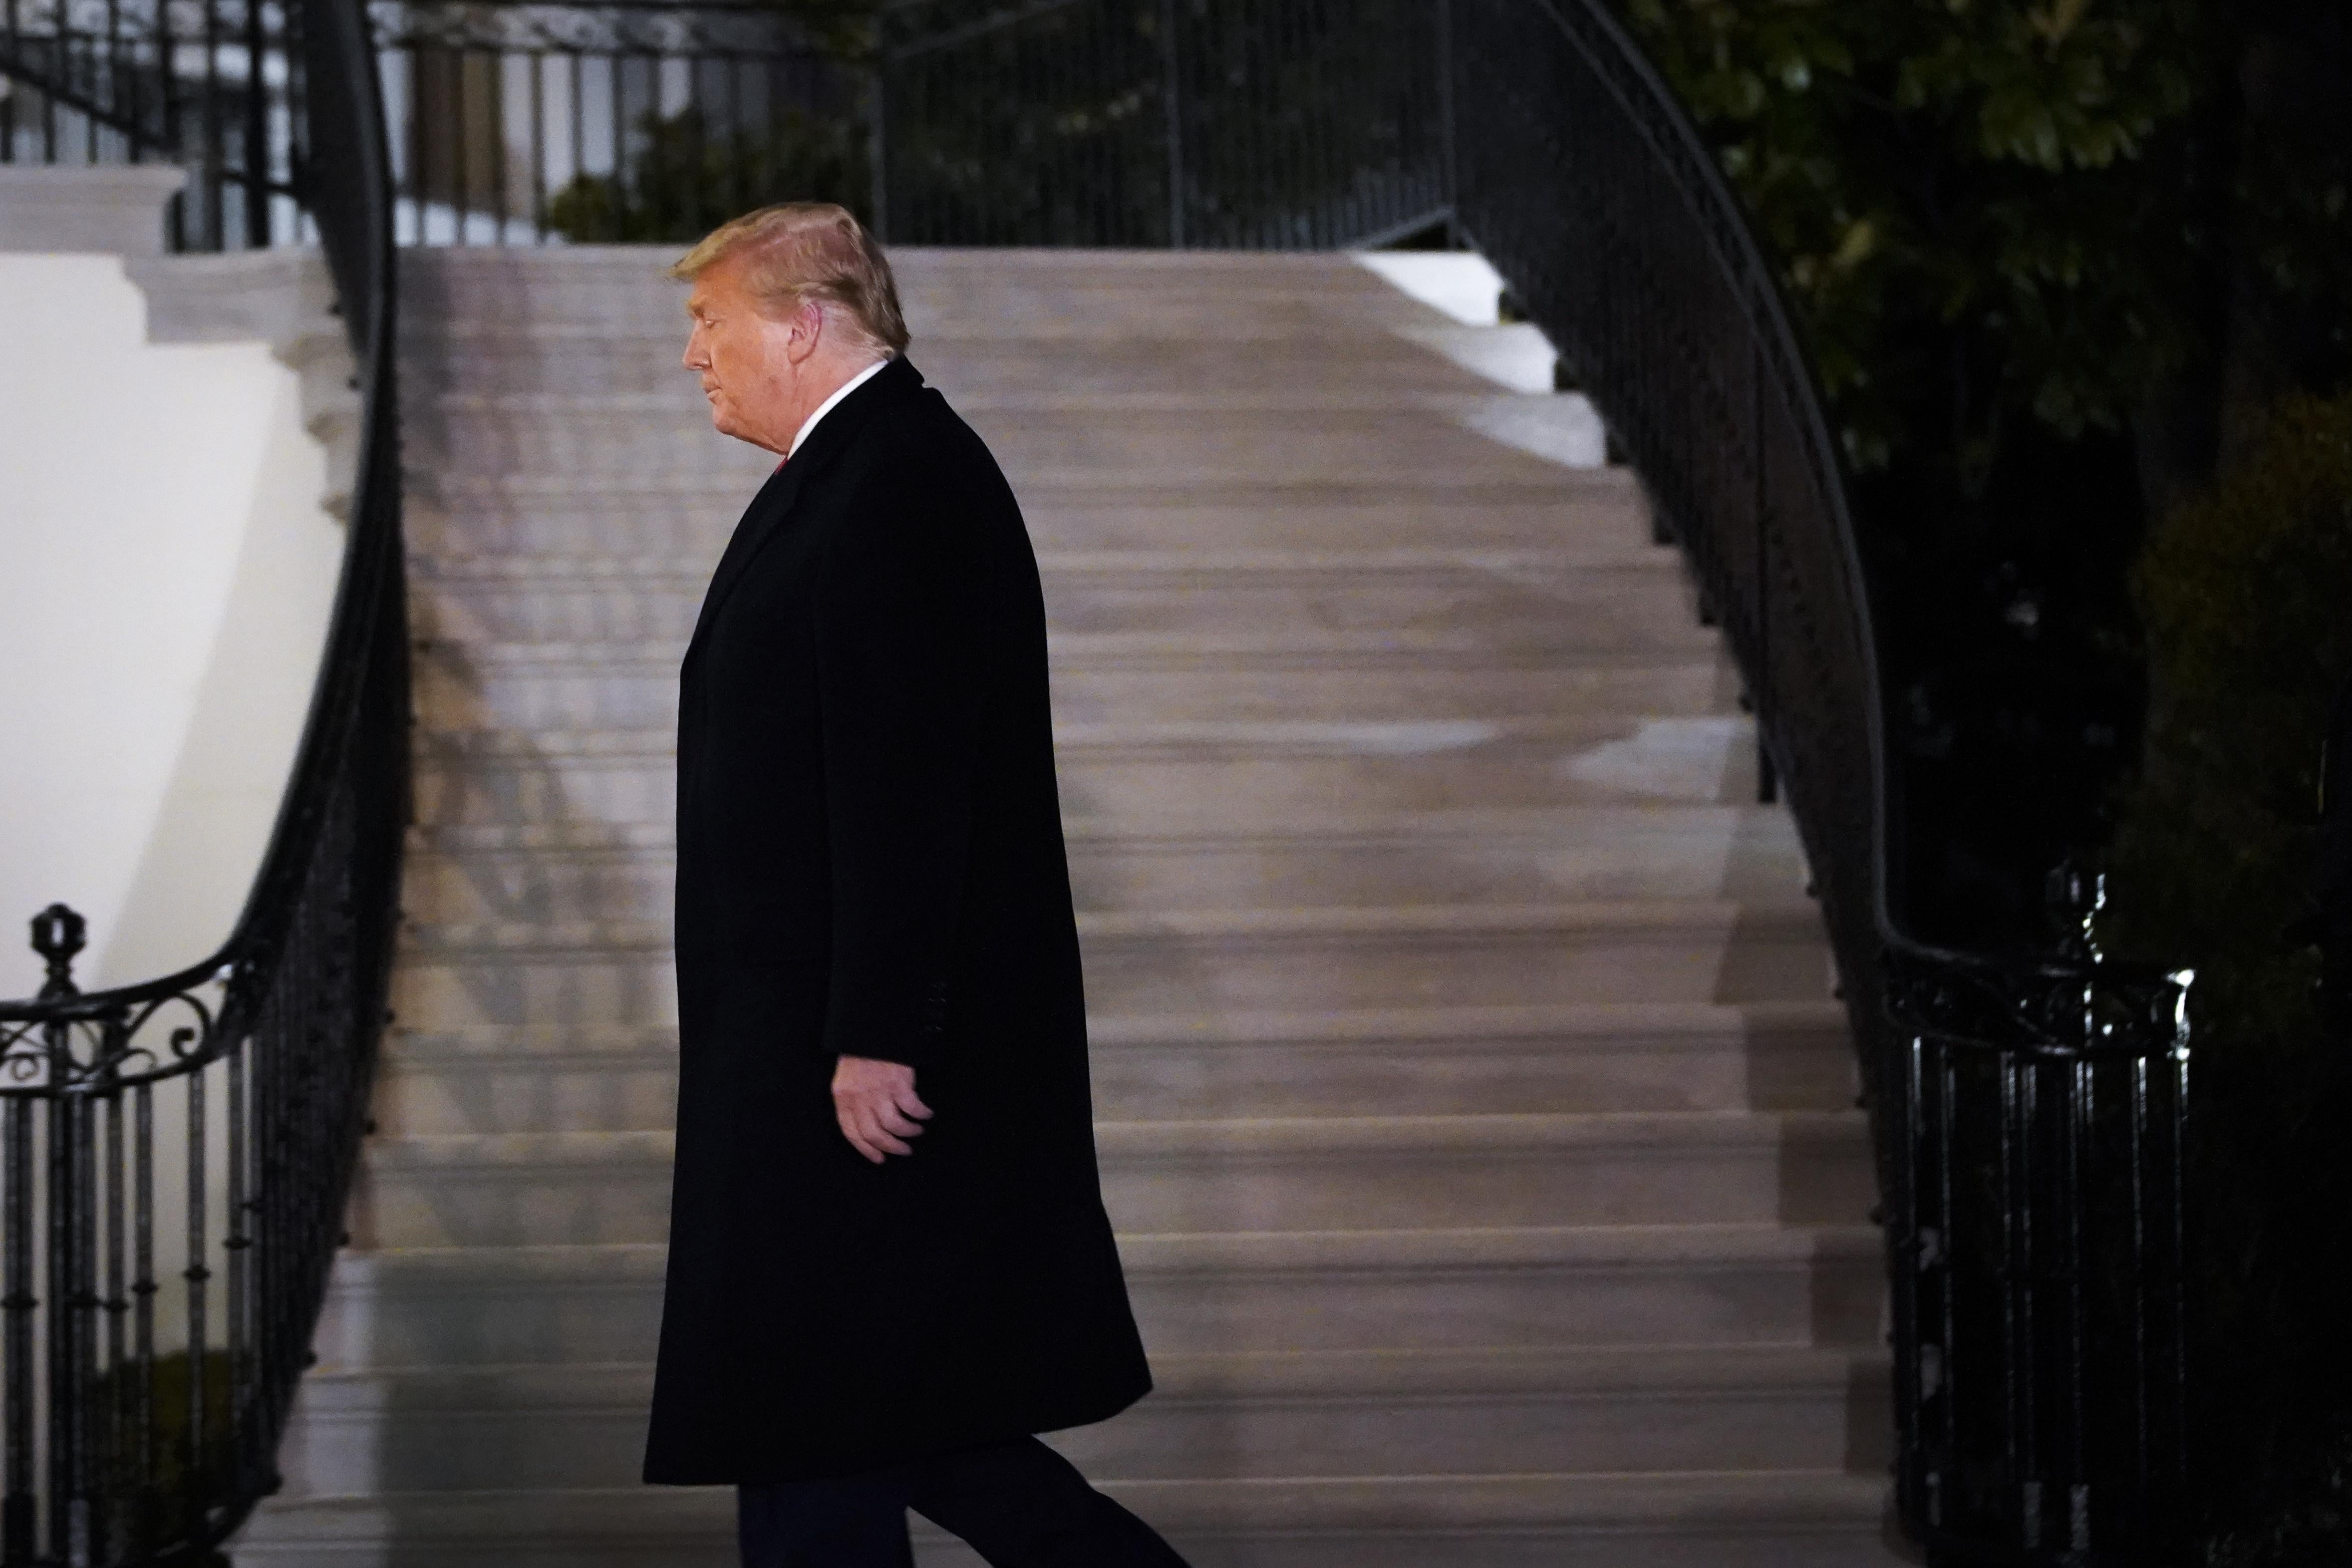 Trump in profile as he walks to the White House residence at night